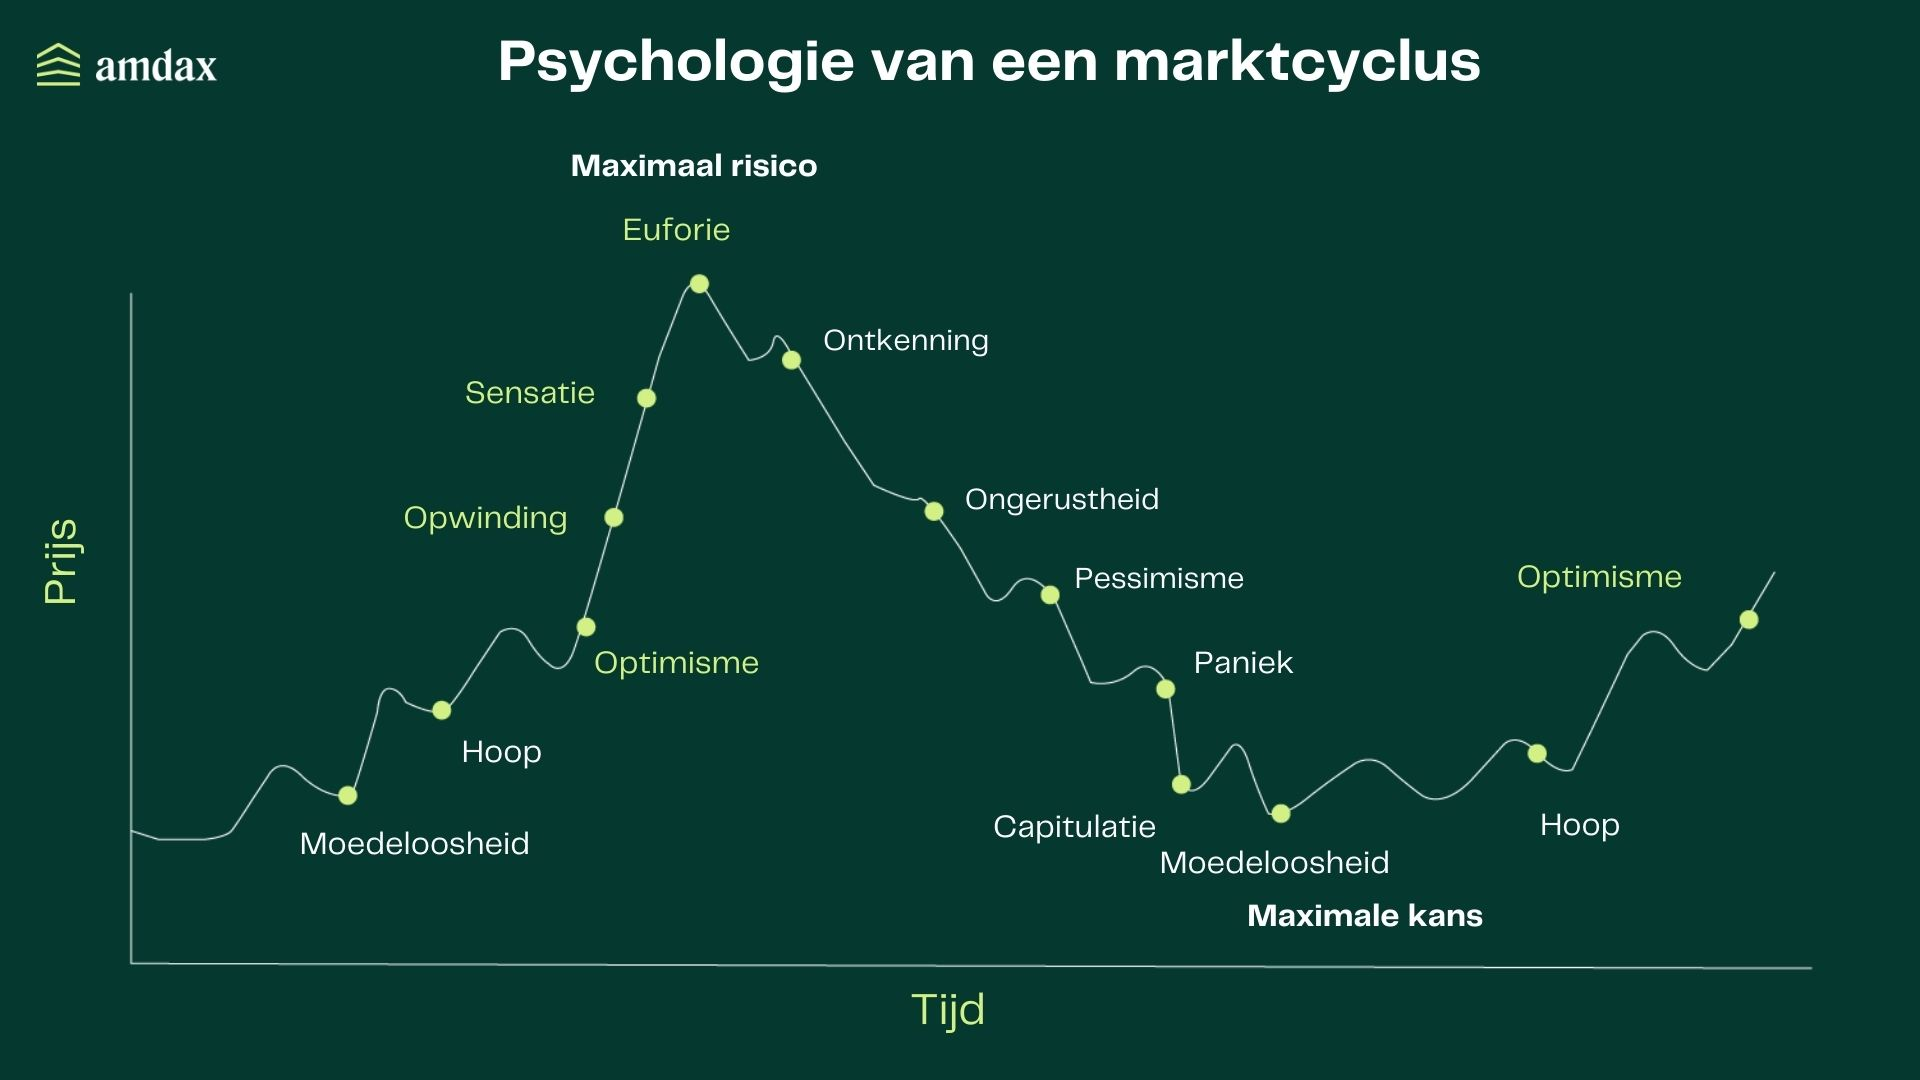 Psychology of a market cycle